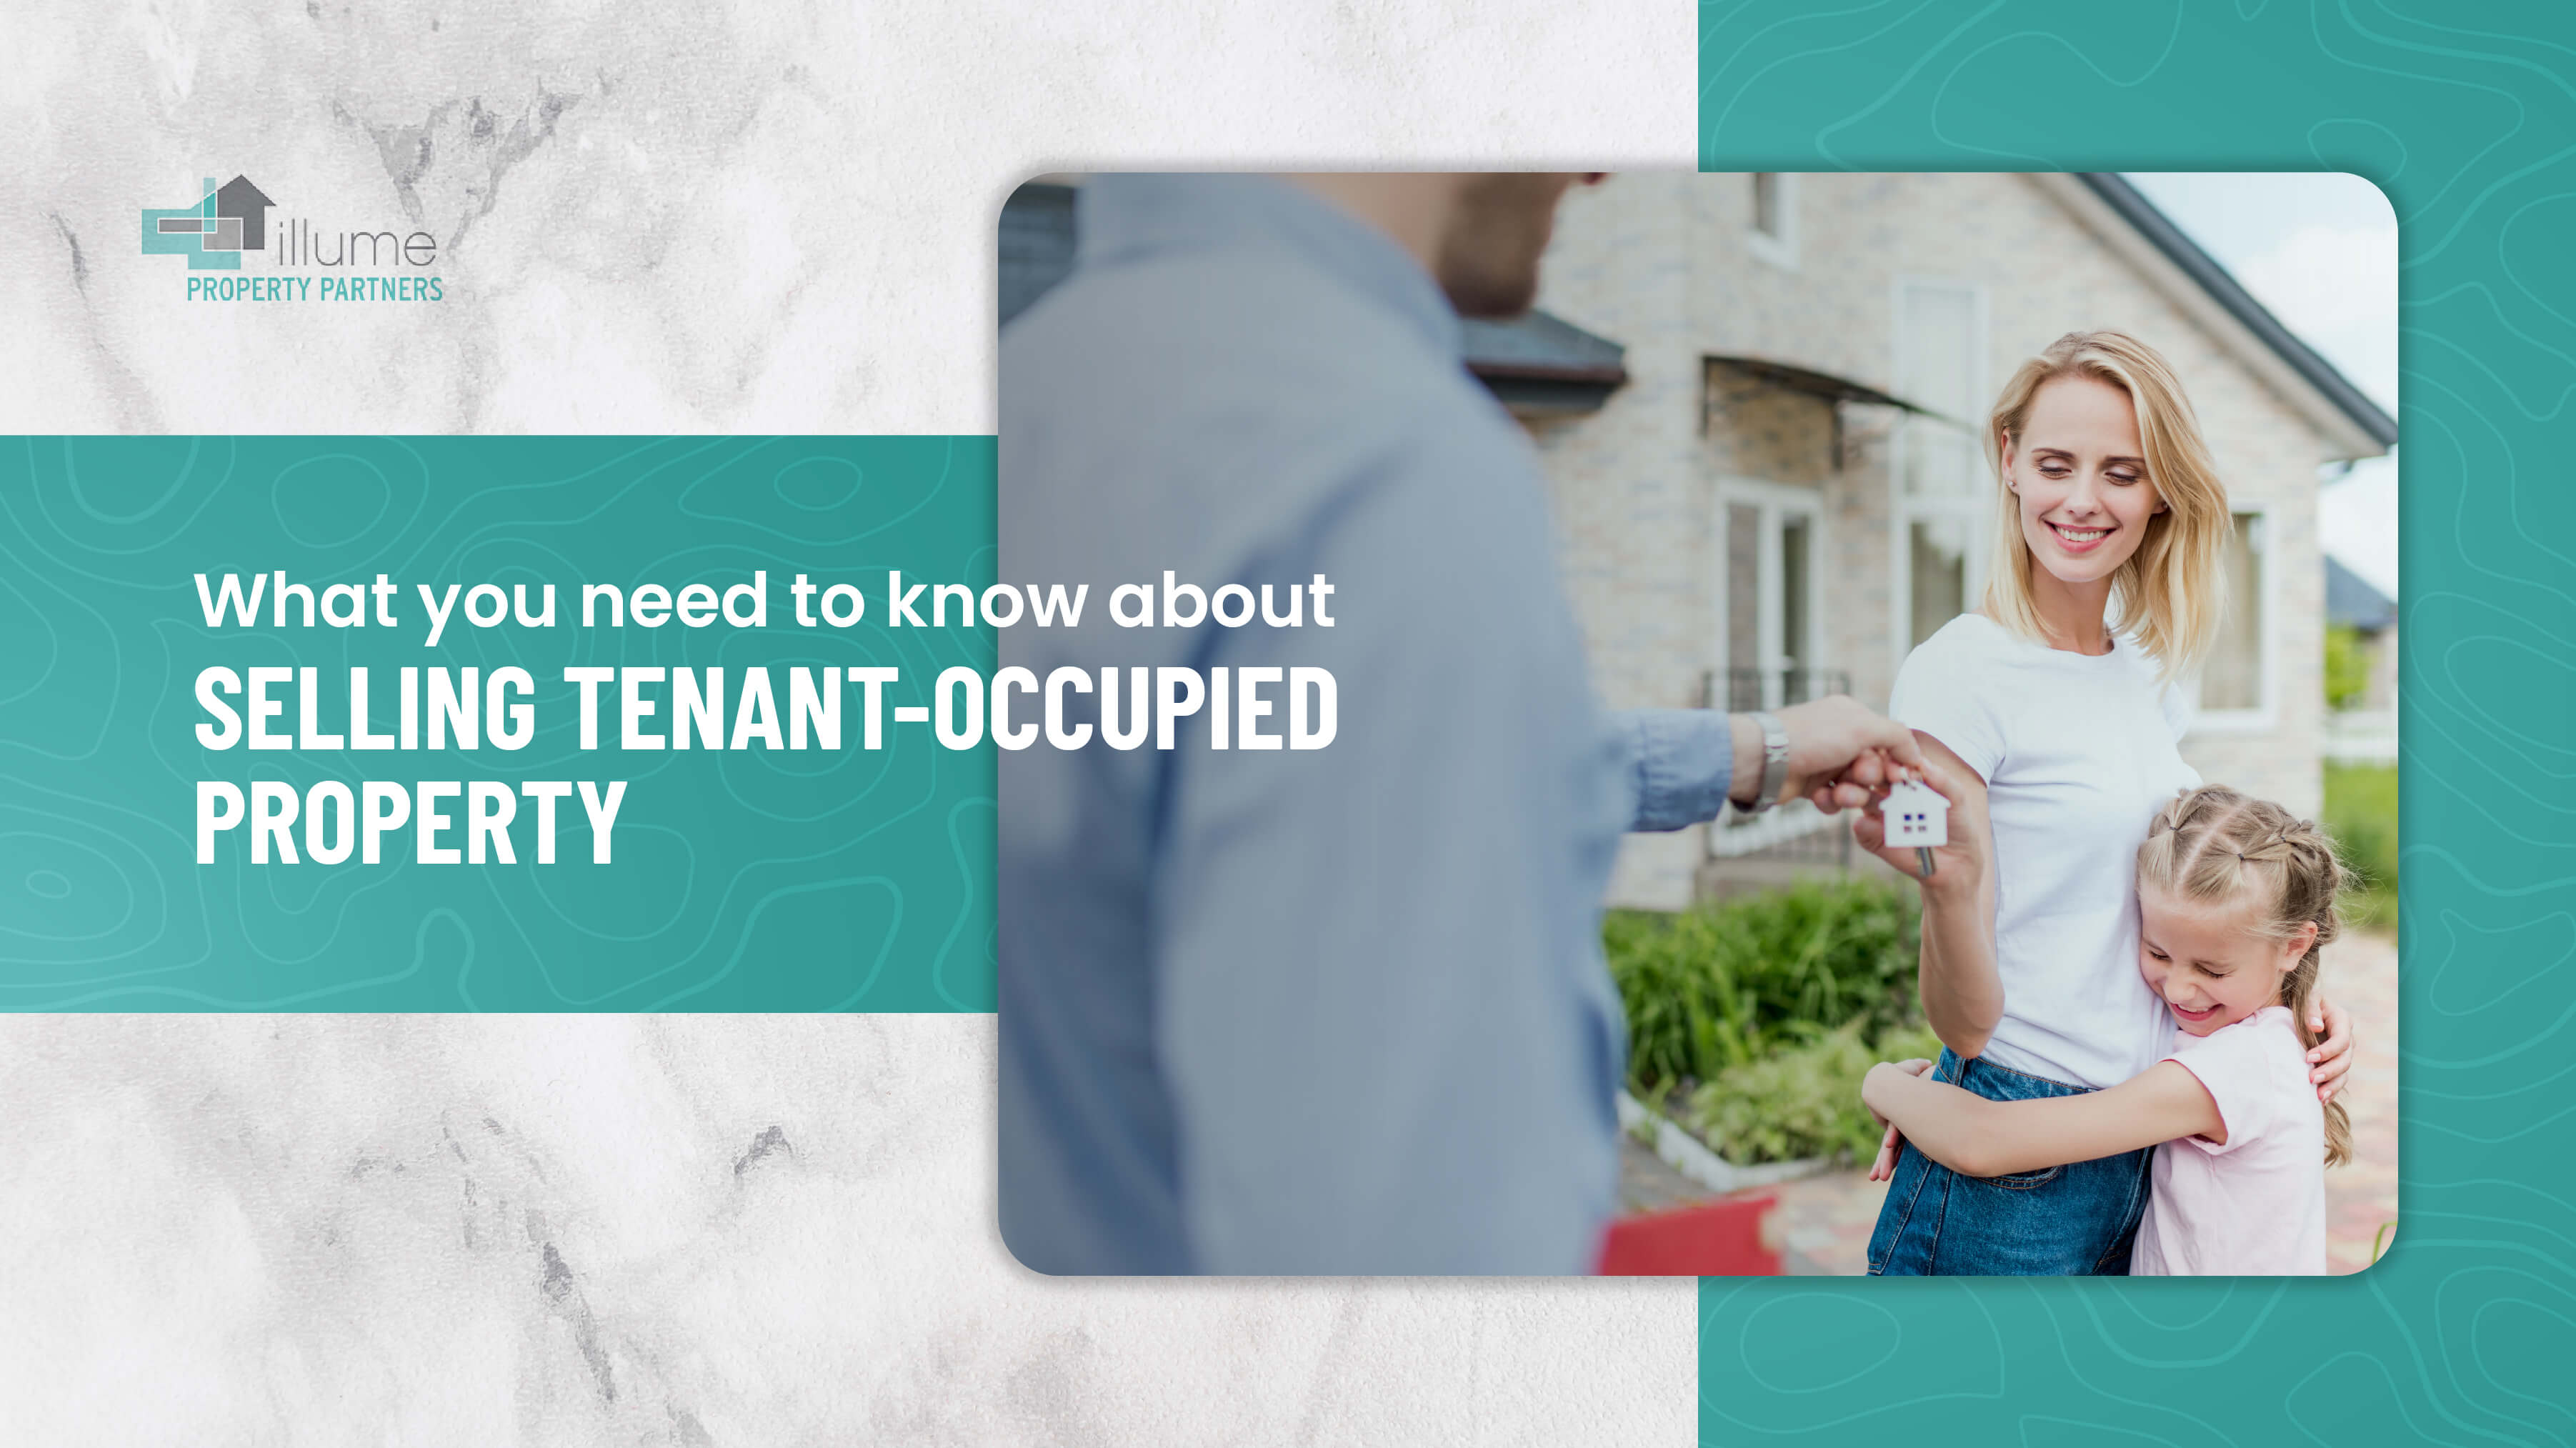 What You Need to Know About Selling Tenant-Occupied Property